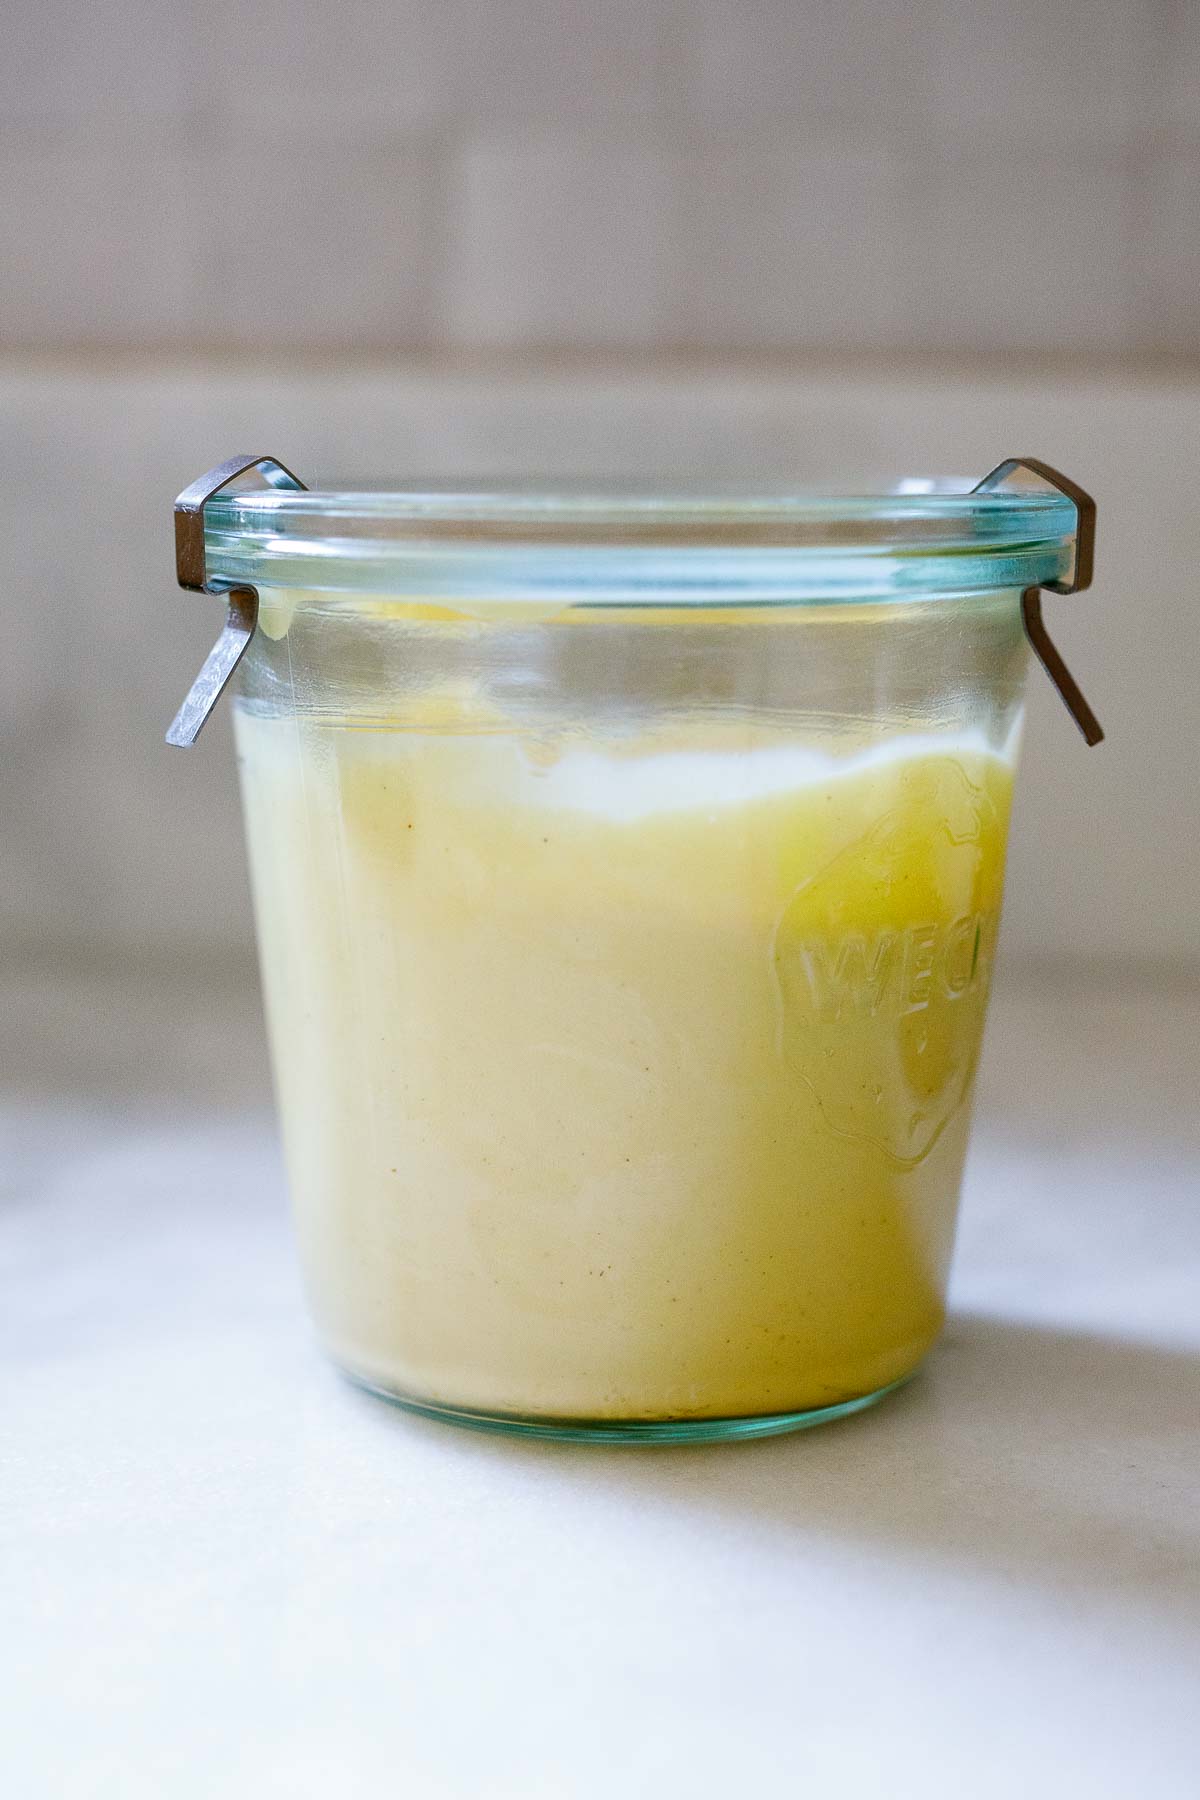 Can You Use an Immersion Blender in Place of a Jar Blender?